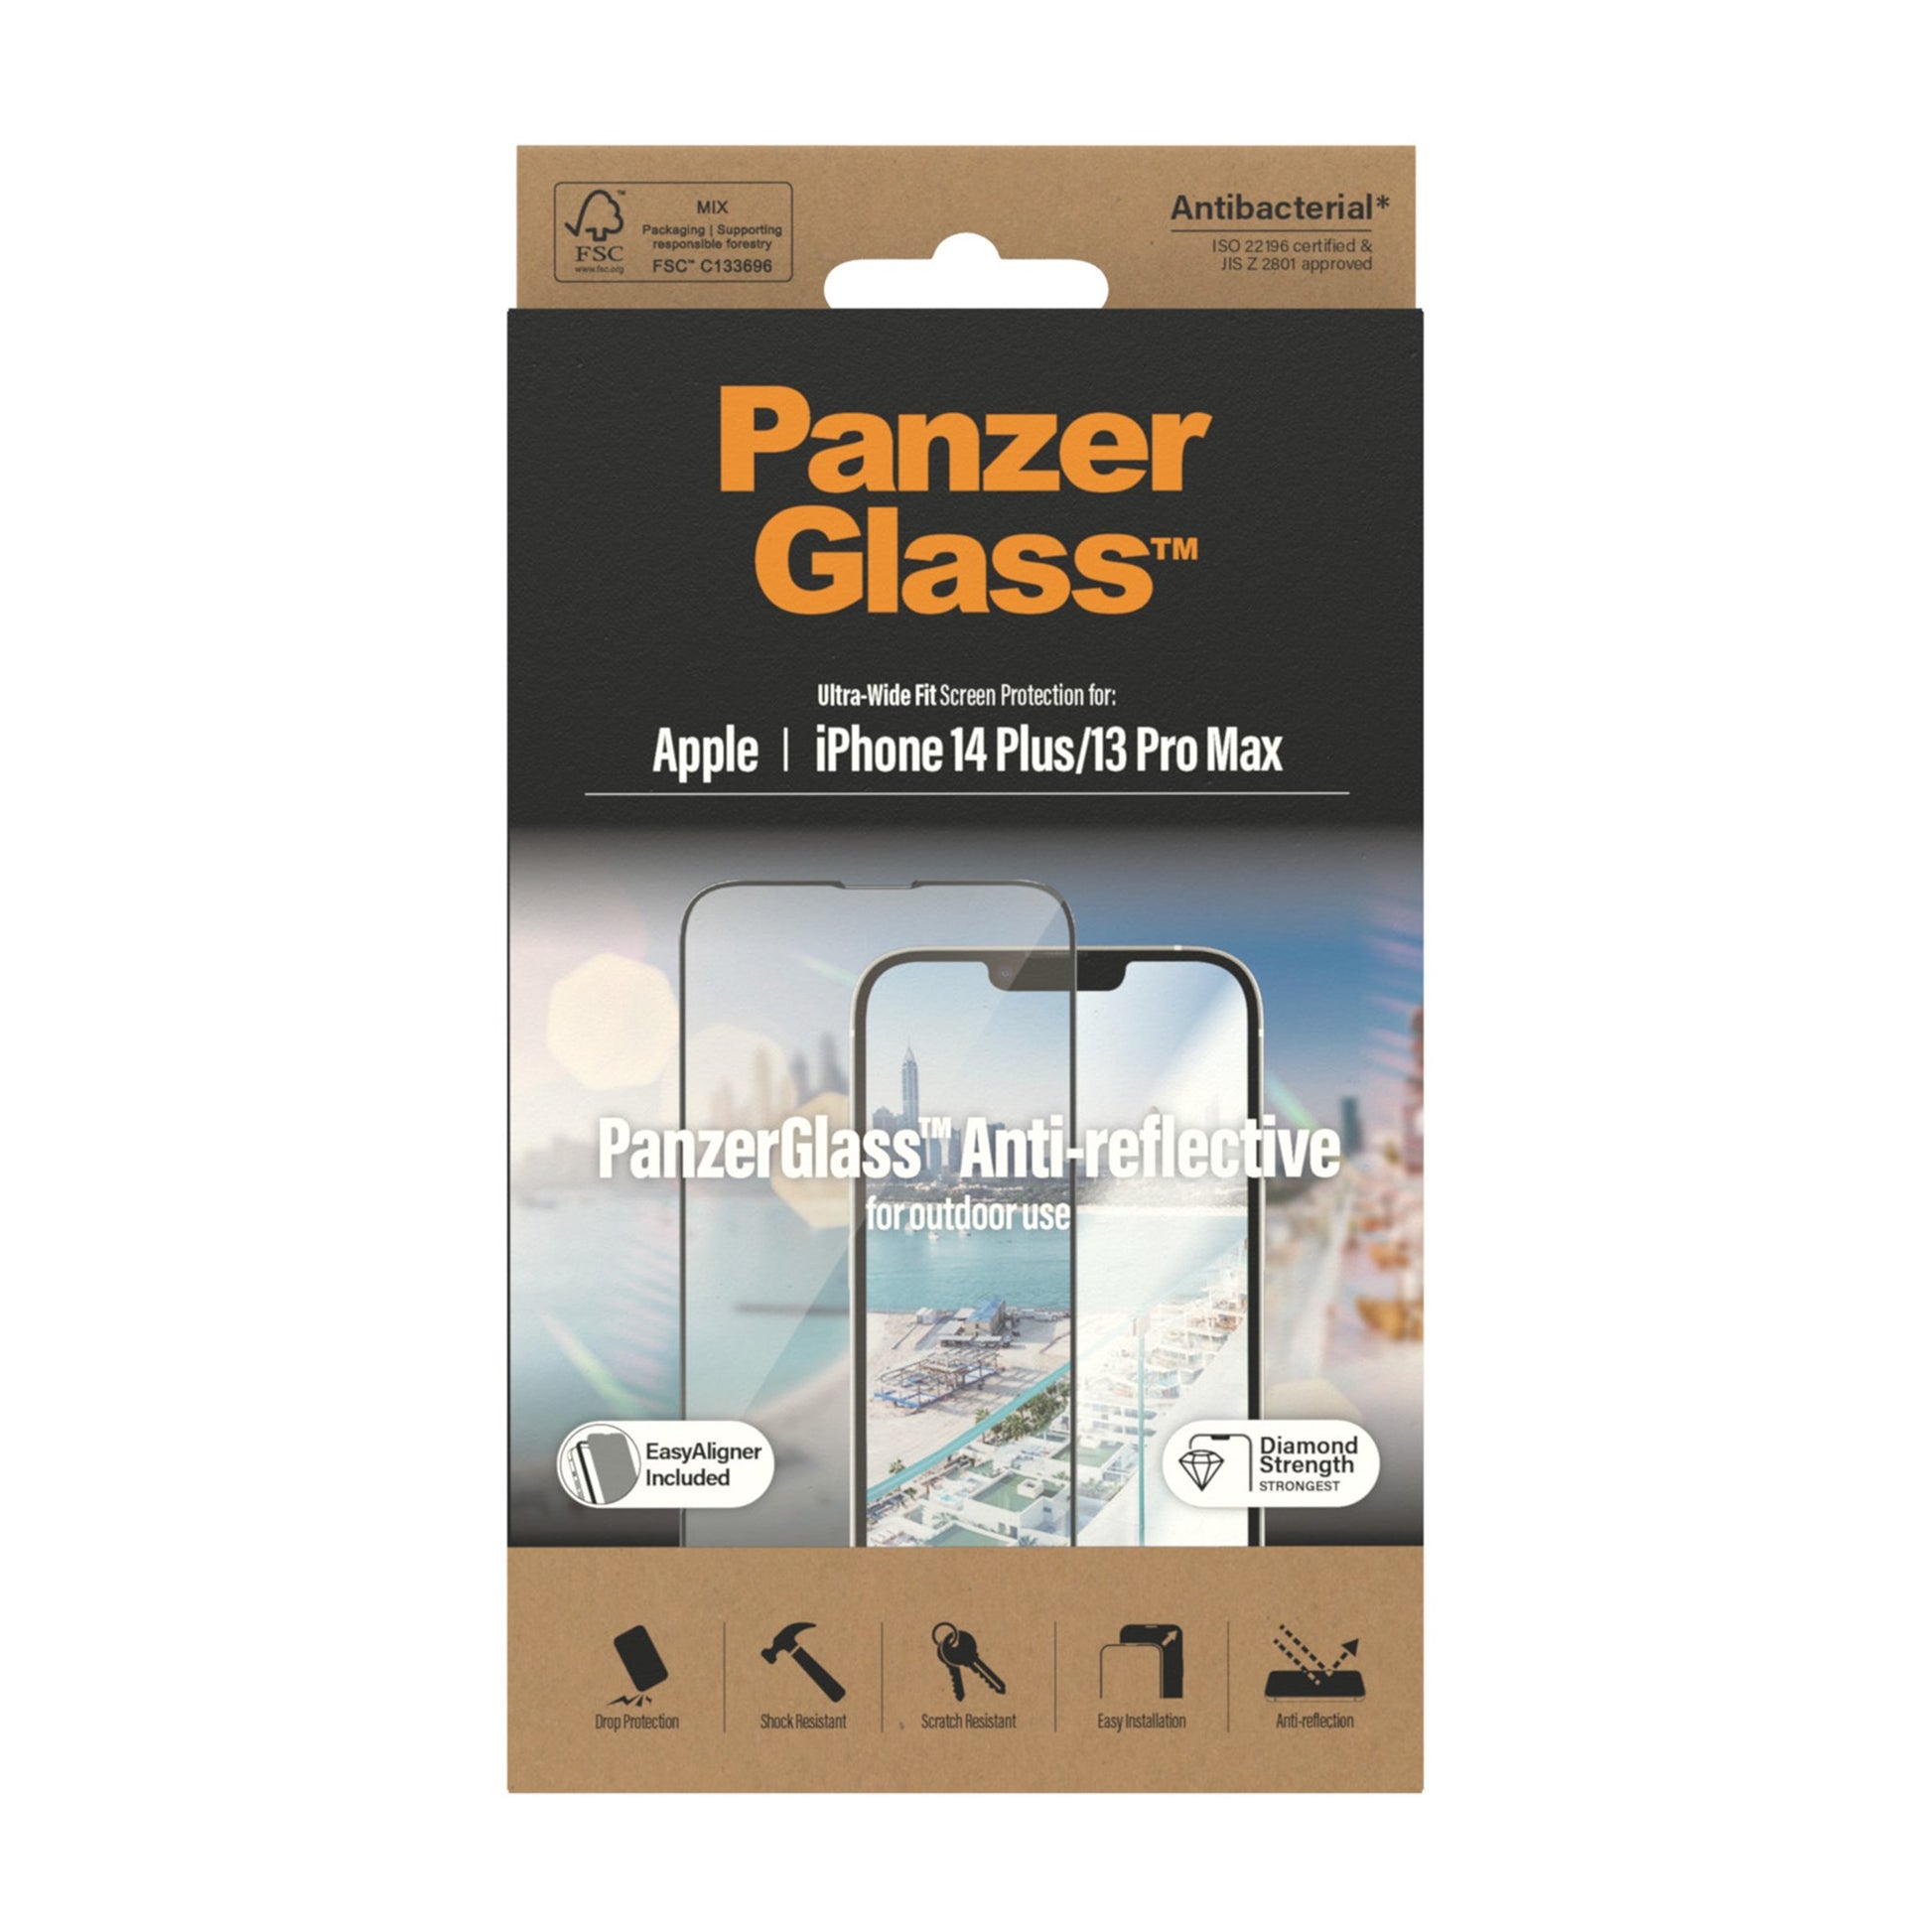 PanzerGlass™ Anti-Reflective Screen Protector Apple iPhone 14 Plus | 13 Pro Max | Ultra-Wide Fit w. EasyAligner 3